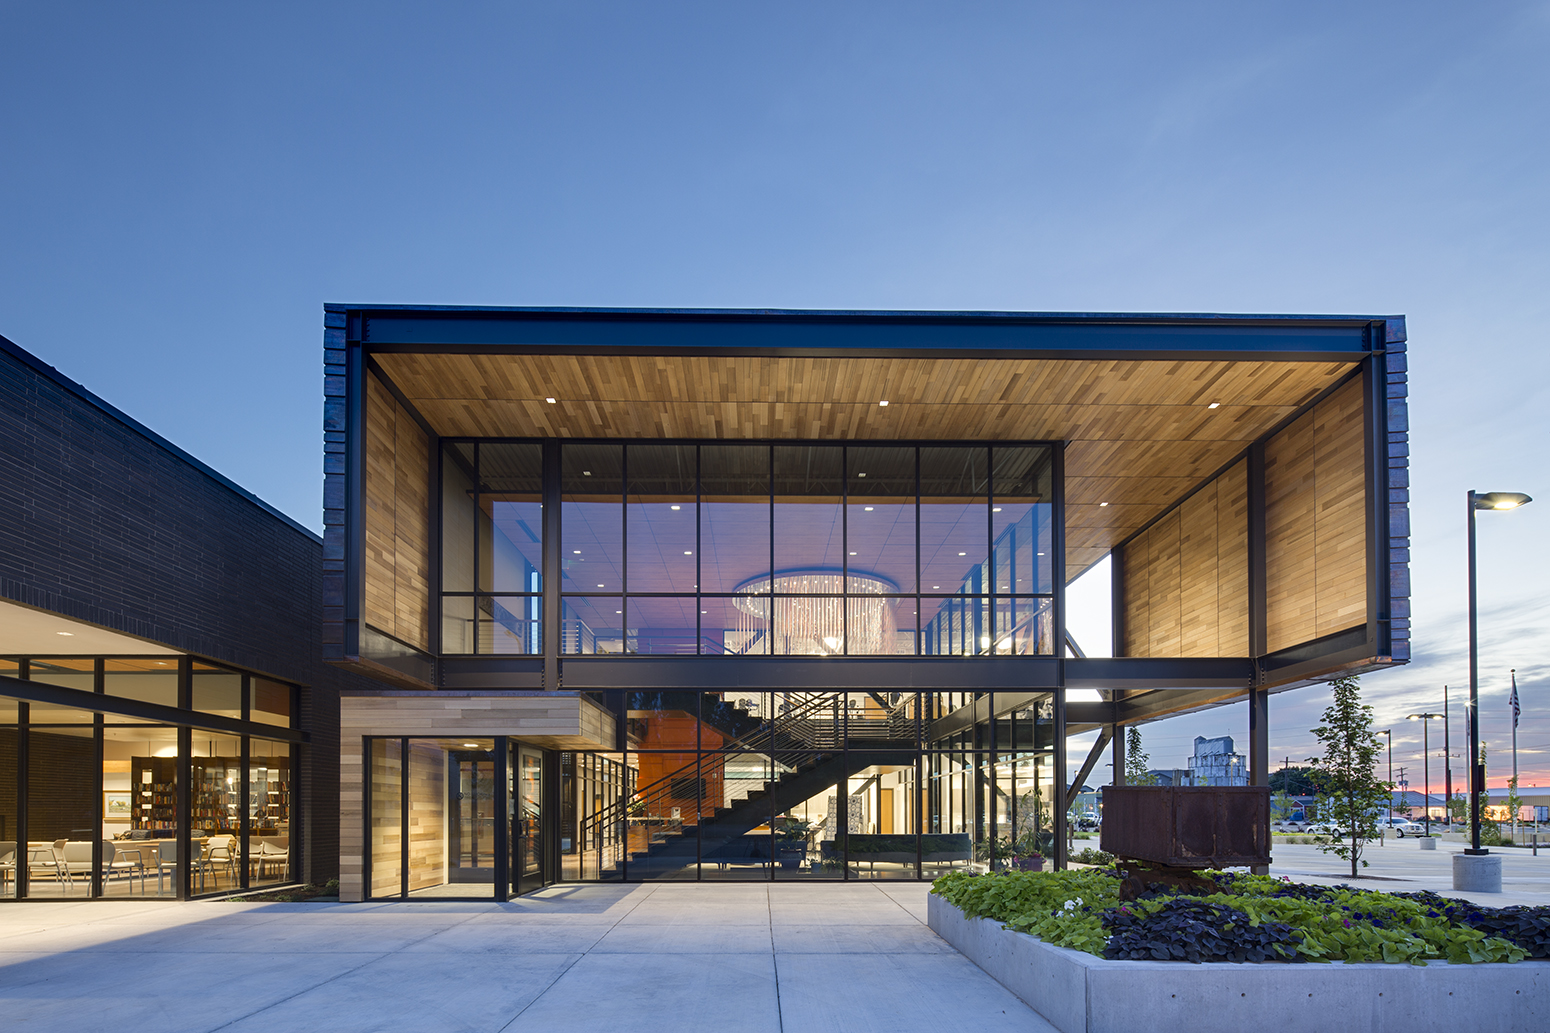 Midvale Senior Center for EDA Architects.Architectural Photography by: Paul Richer / RICHER IMAGES